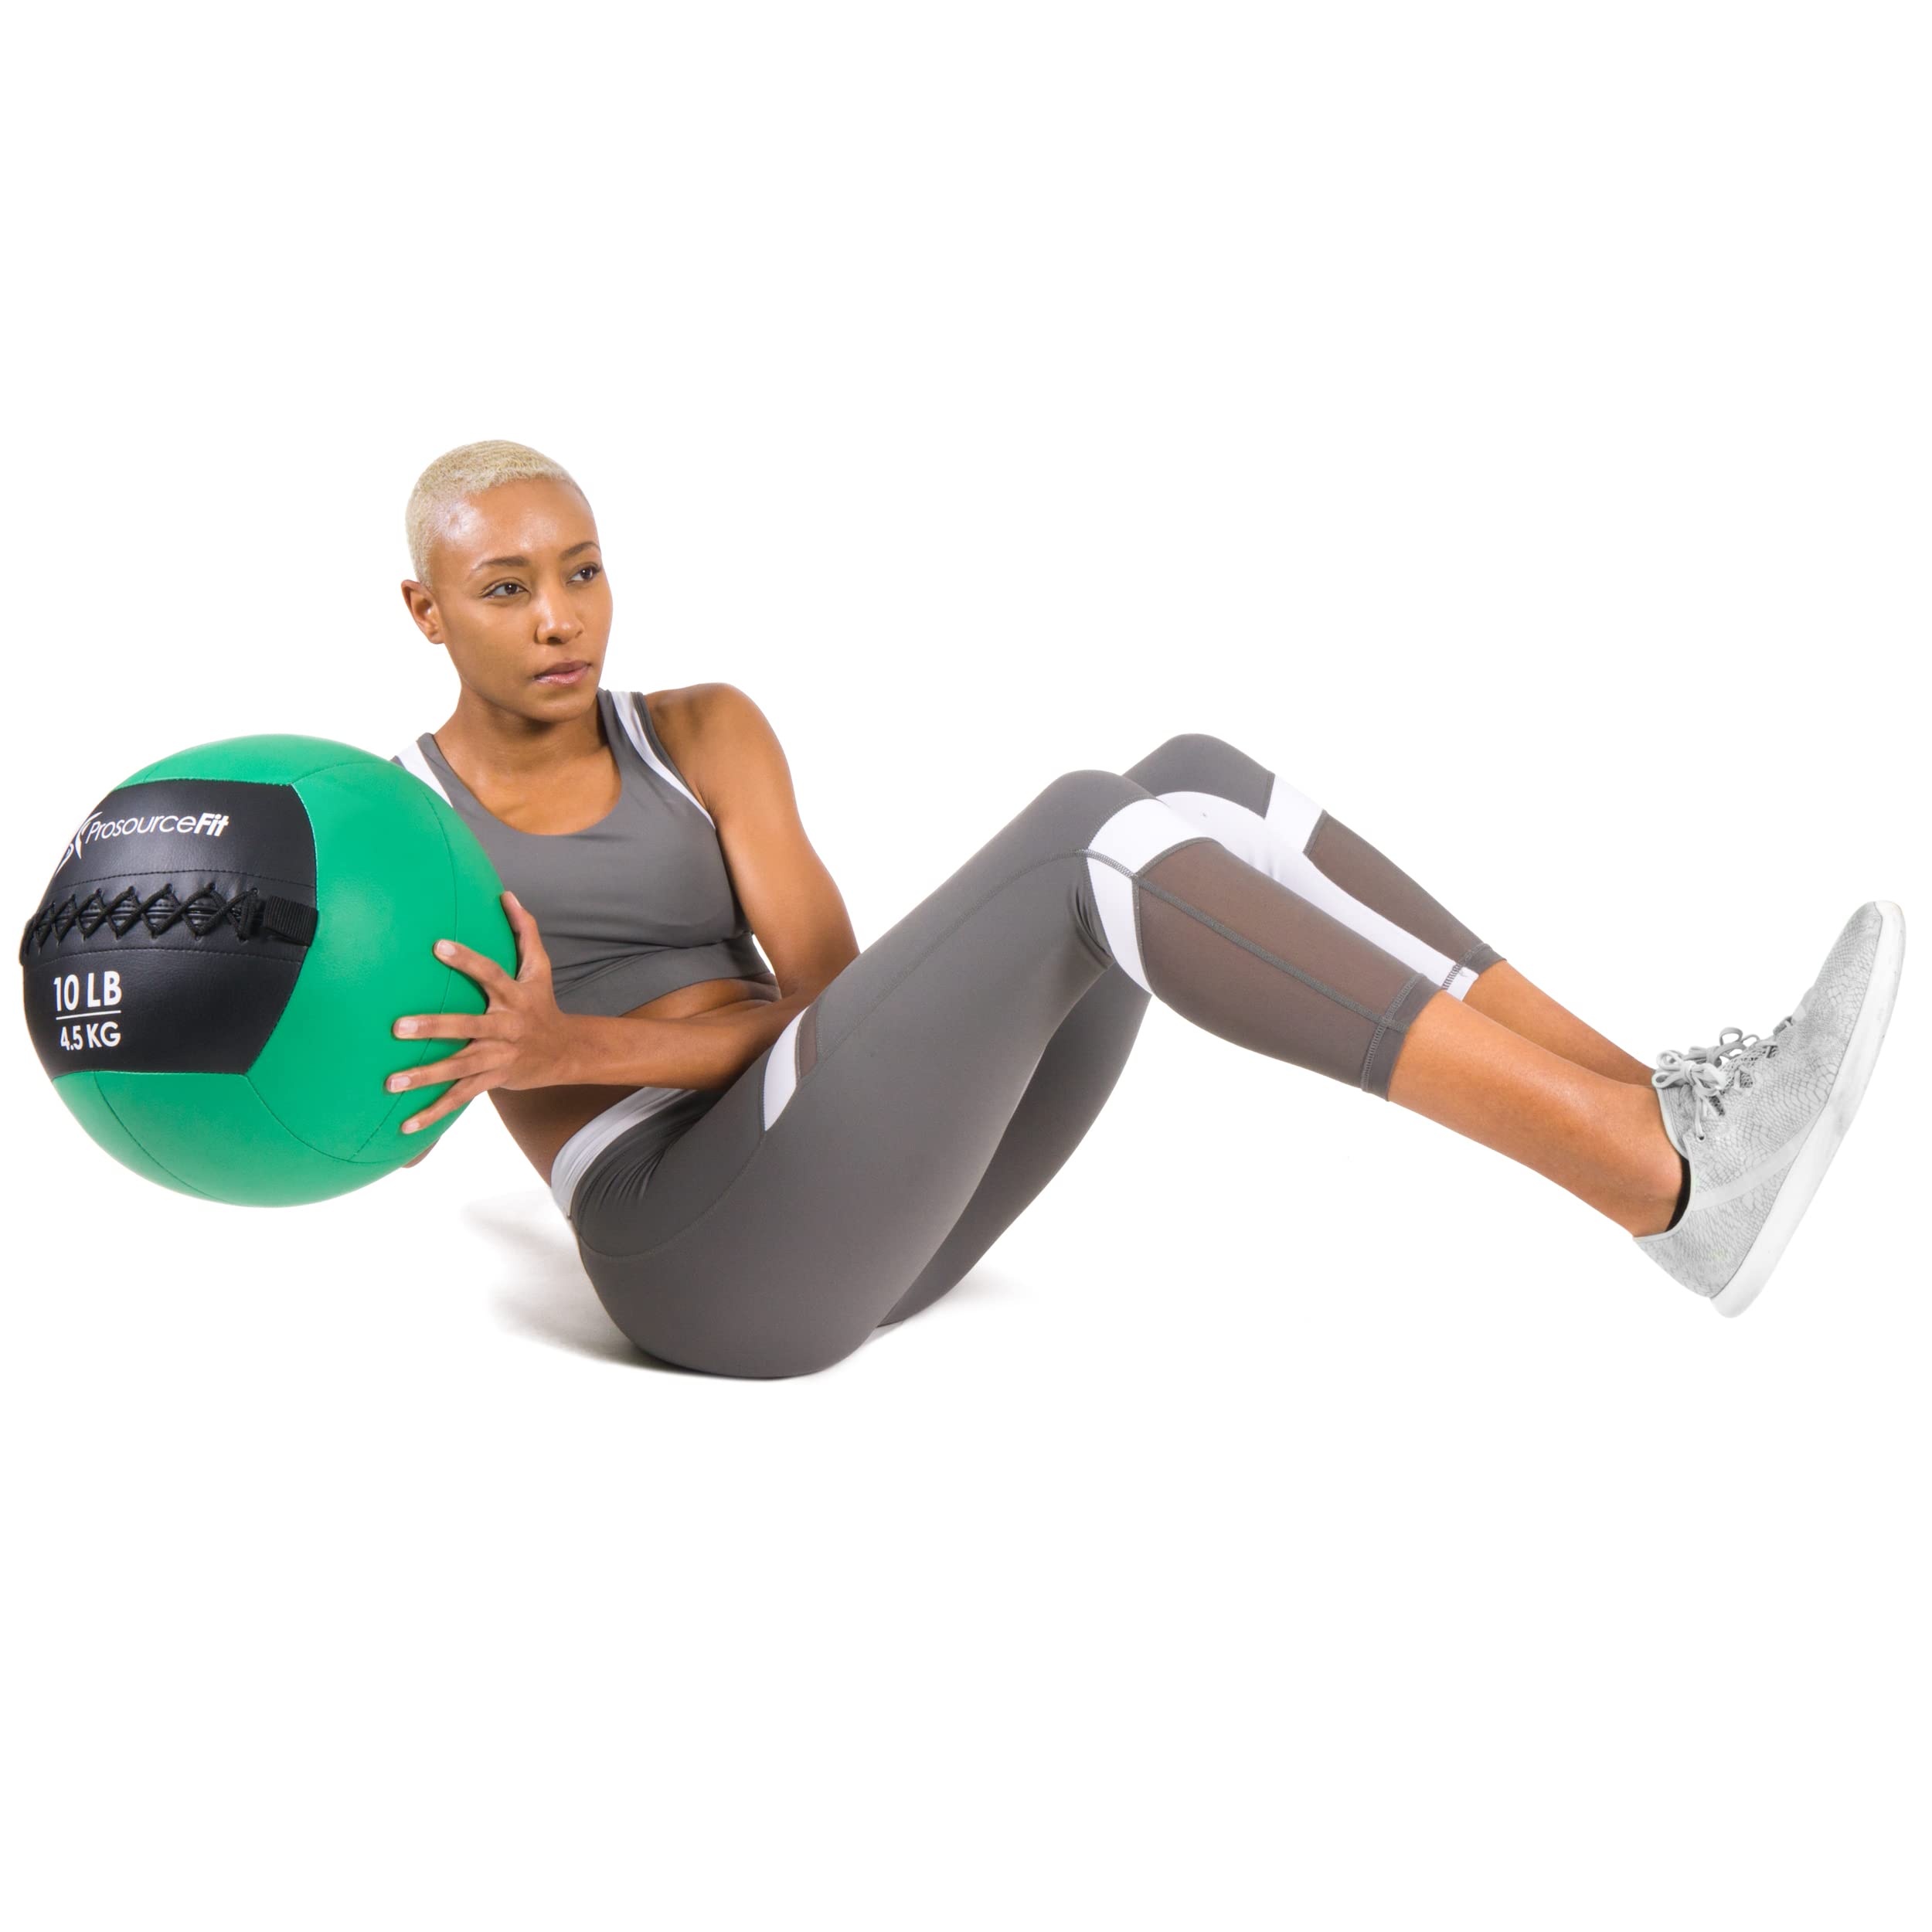 ProsourceFit Soft Medicine Balls for Wall Balls and Full Body Dynamic Exercises, Color-Coded Weights